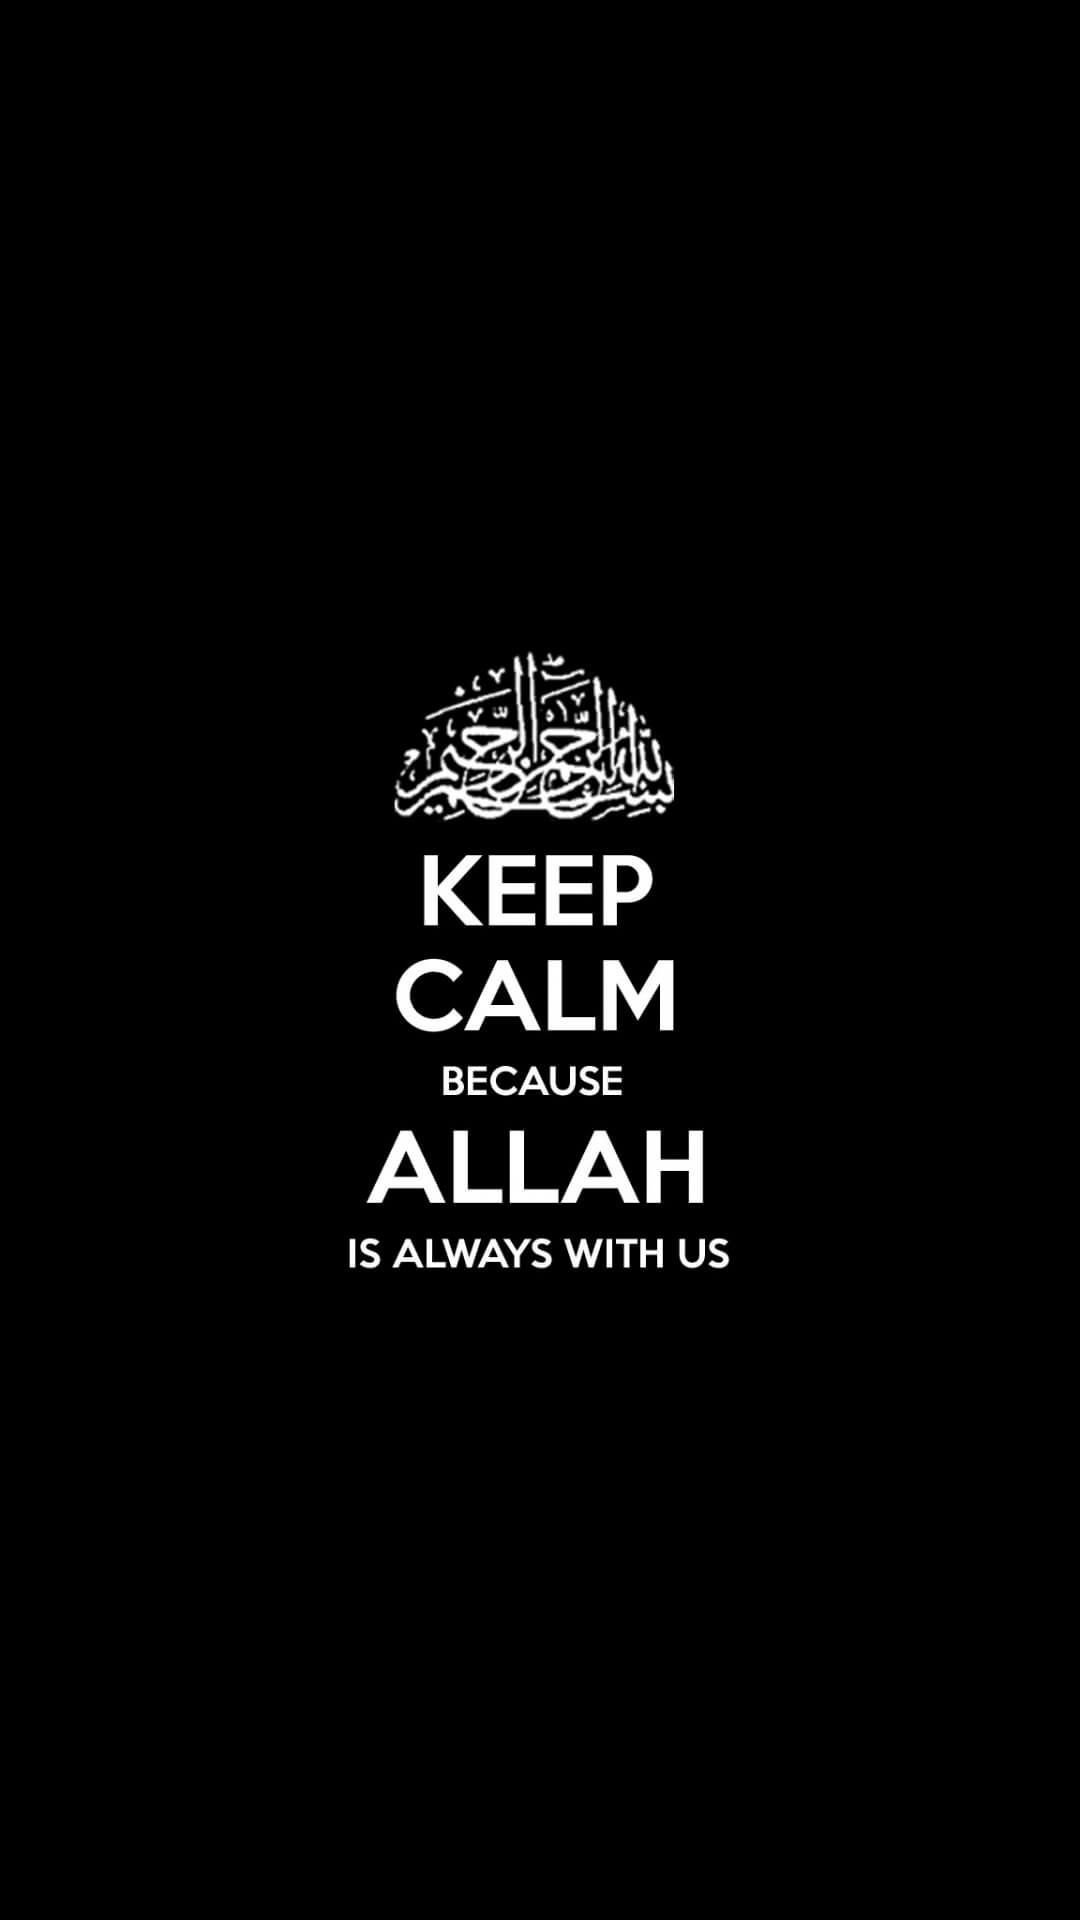 Keep calm because allah is always with us